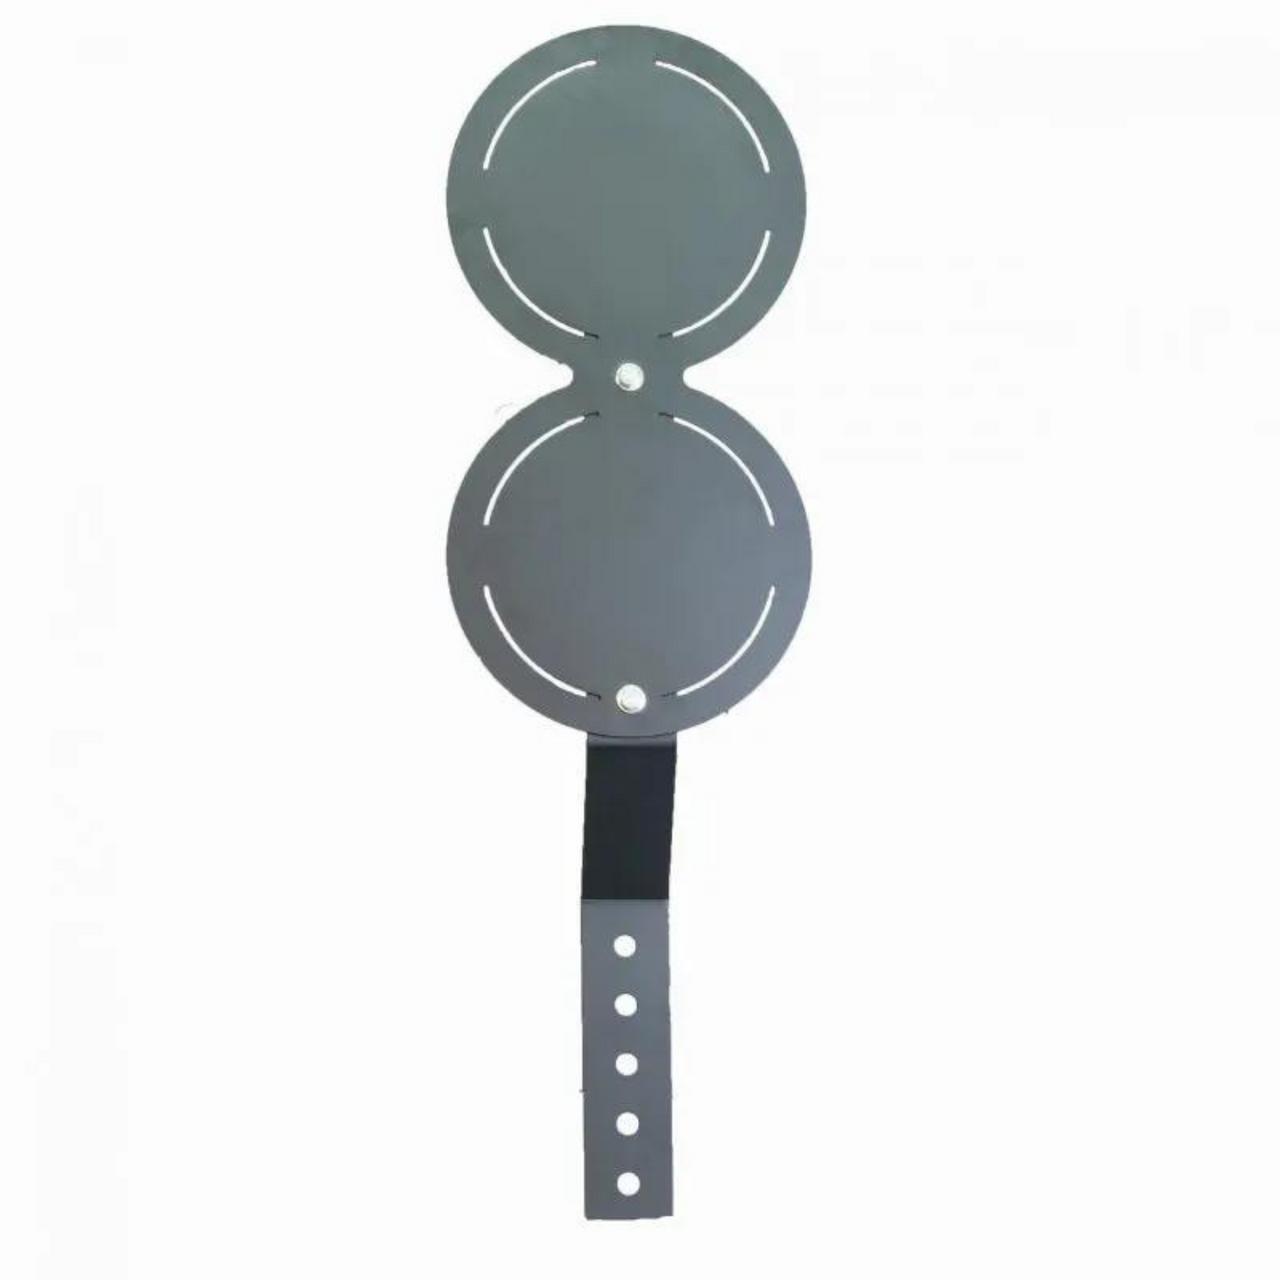 VULCAN Double Wall Ball Target for 75x75mm Uprights | IN STOCK